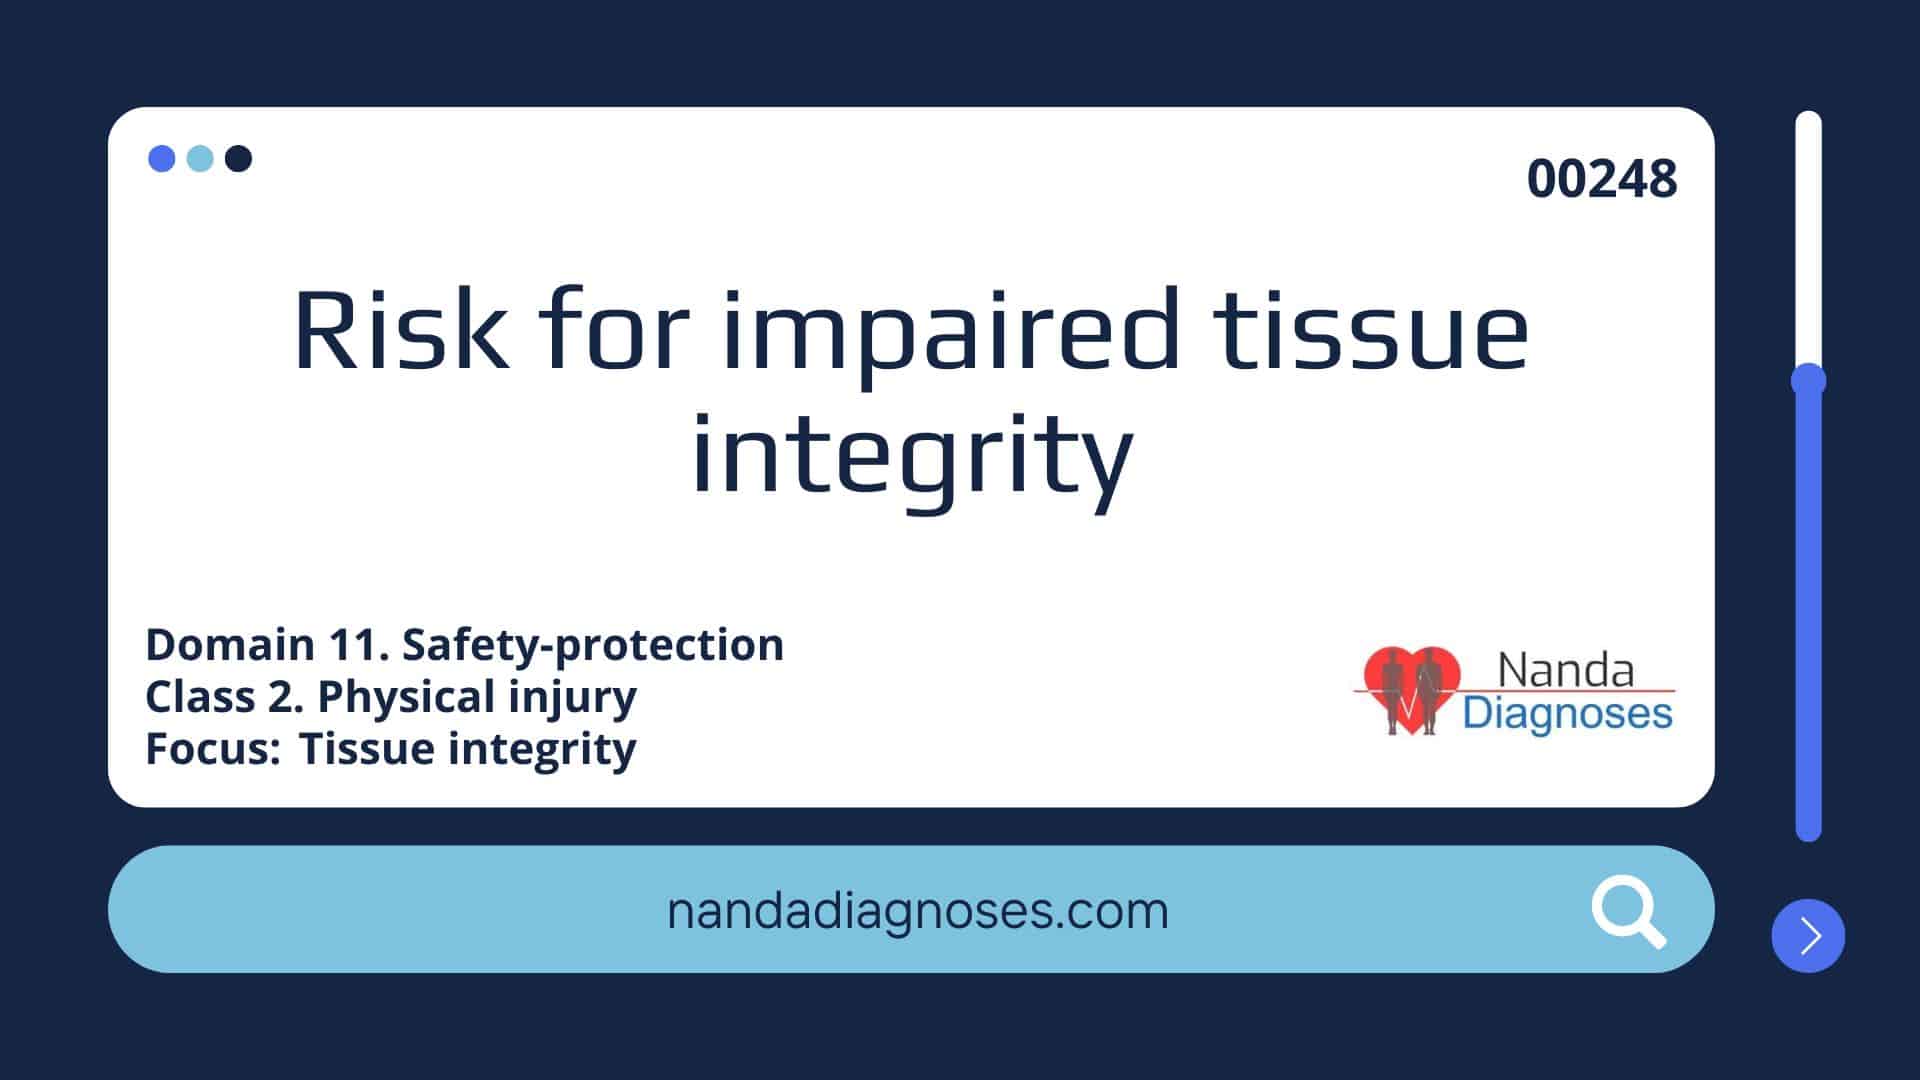 Nursing diagnosis Risk for impaired tissue integrity